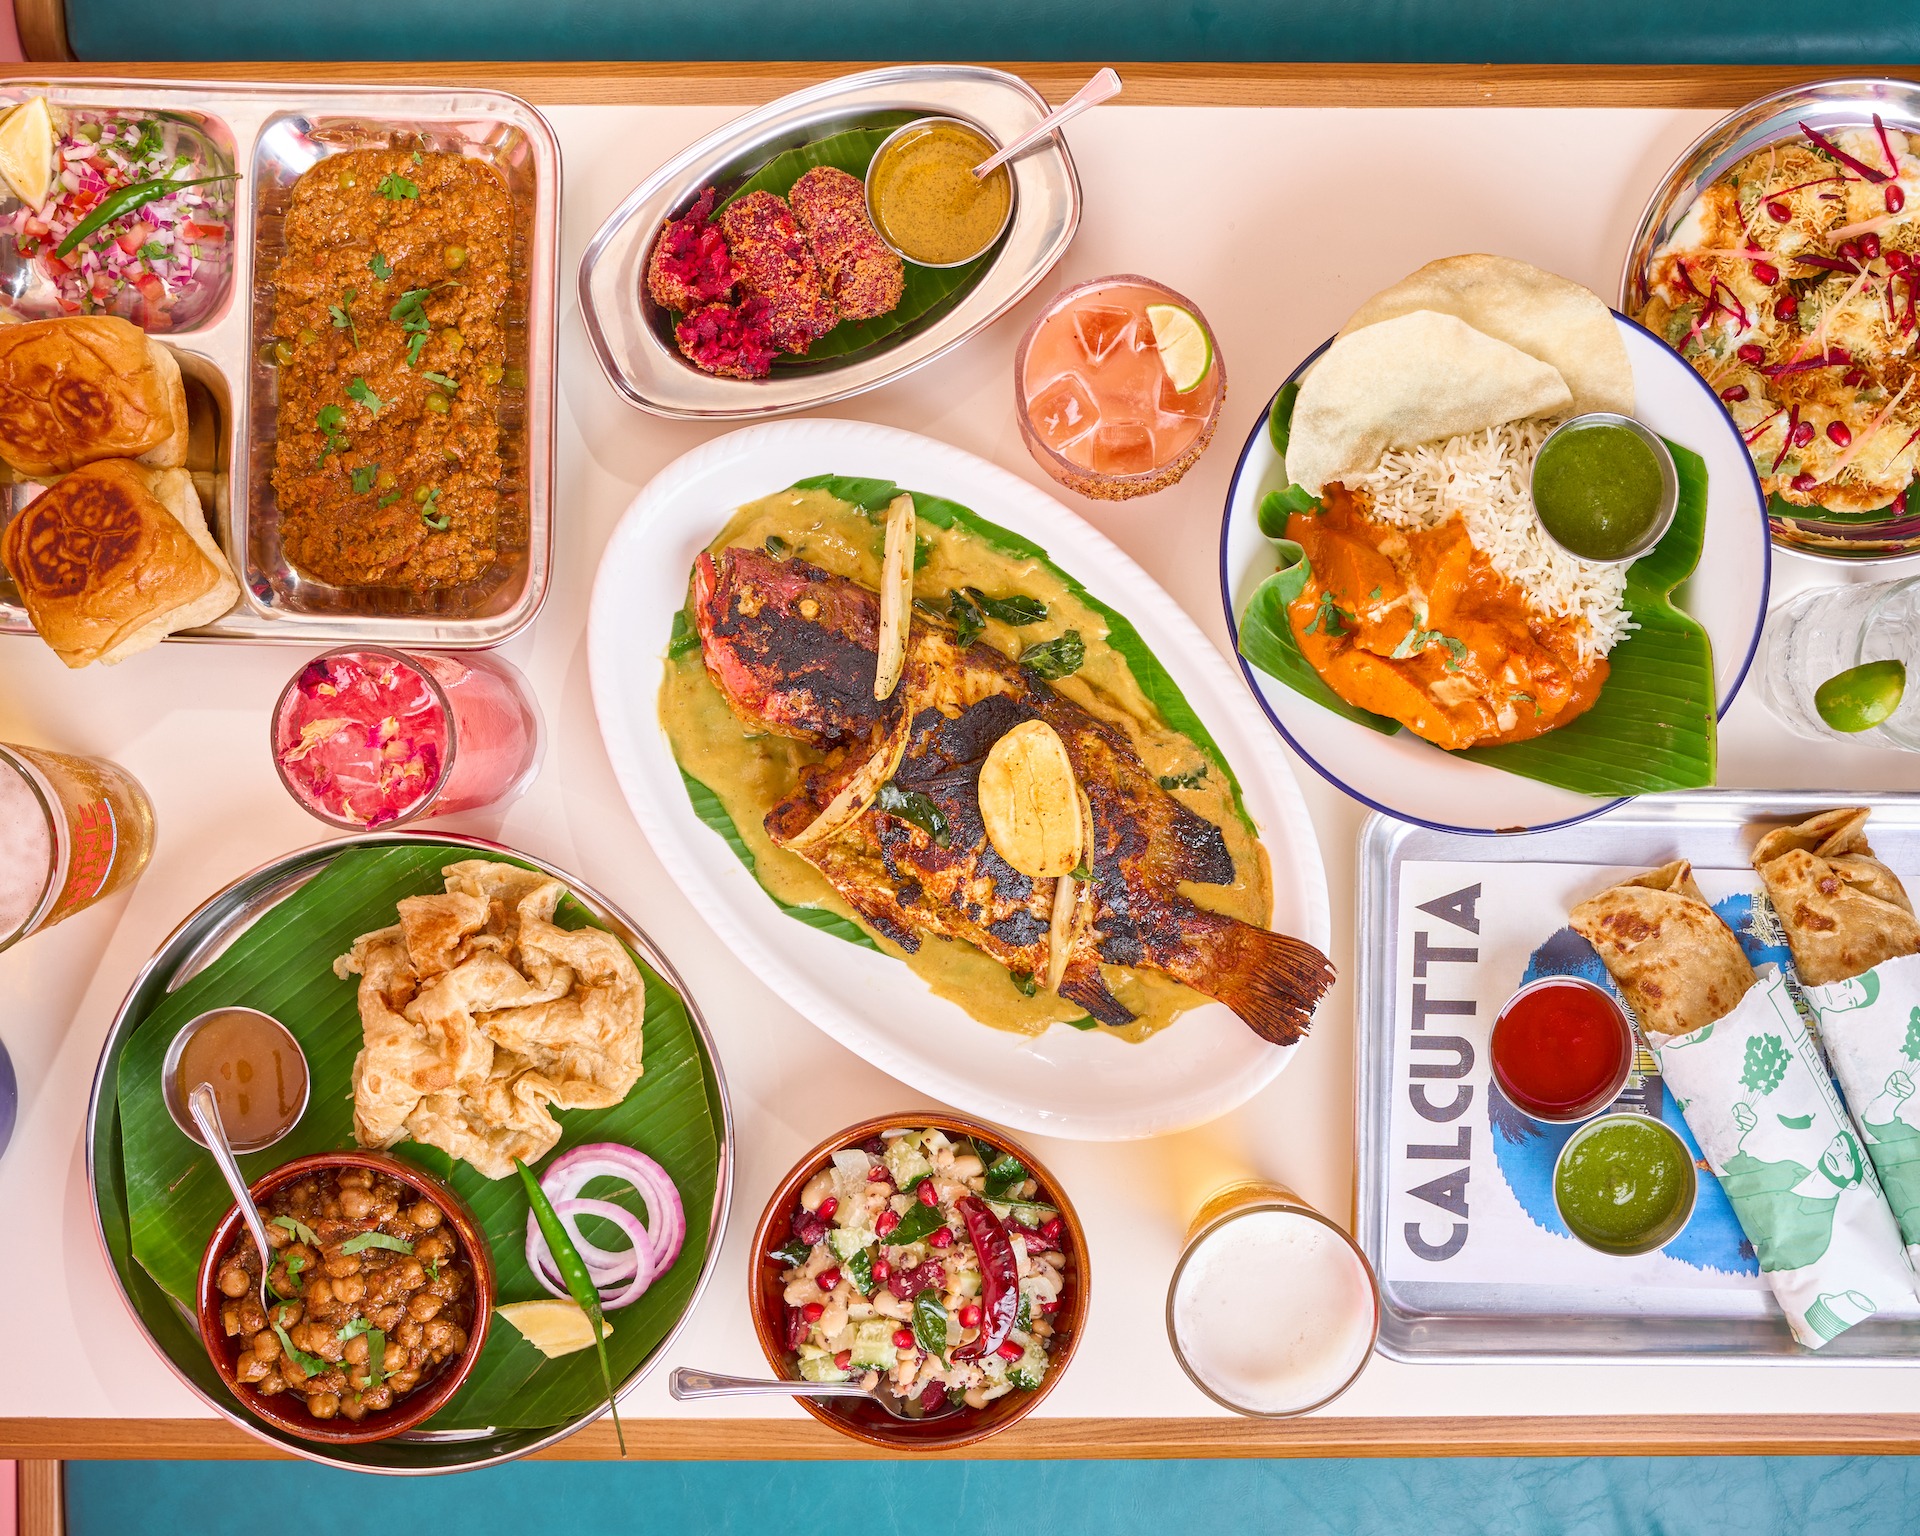 an overhead view of the offerings from bengal brothers, which includes keema pav, a whole fish, butter chicken, and kati rolls.